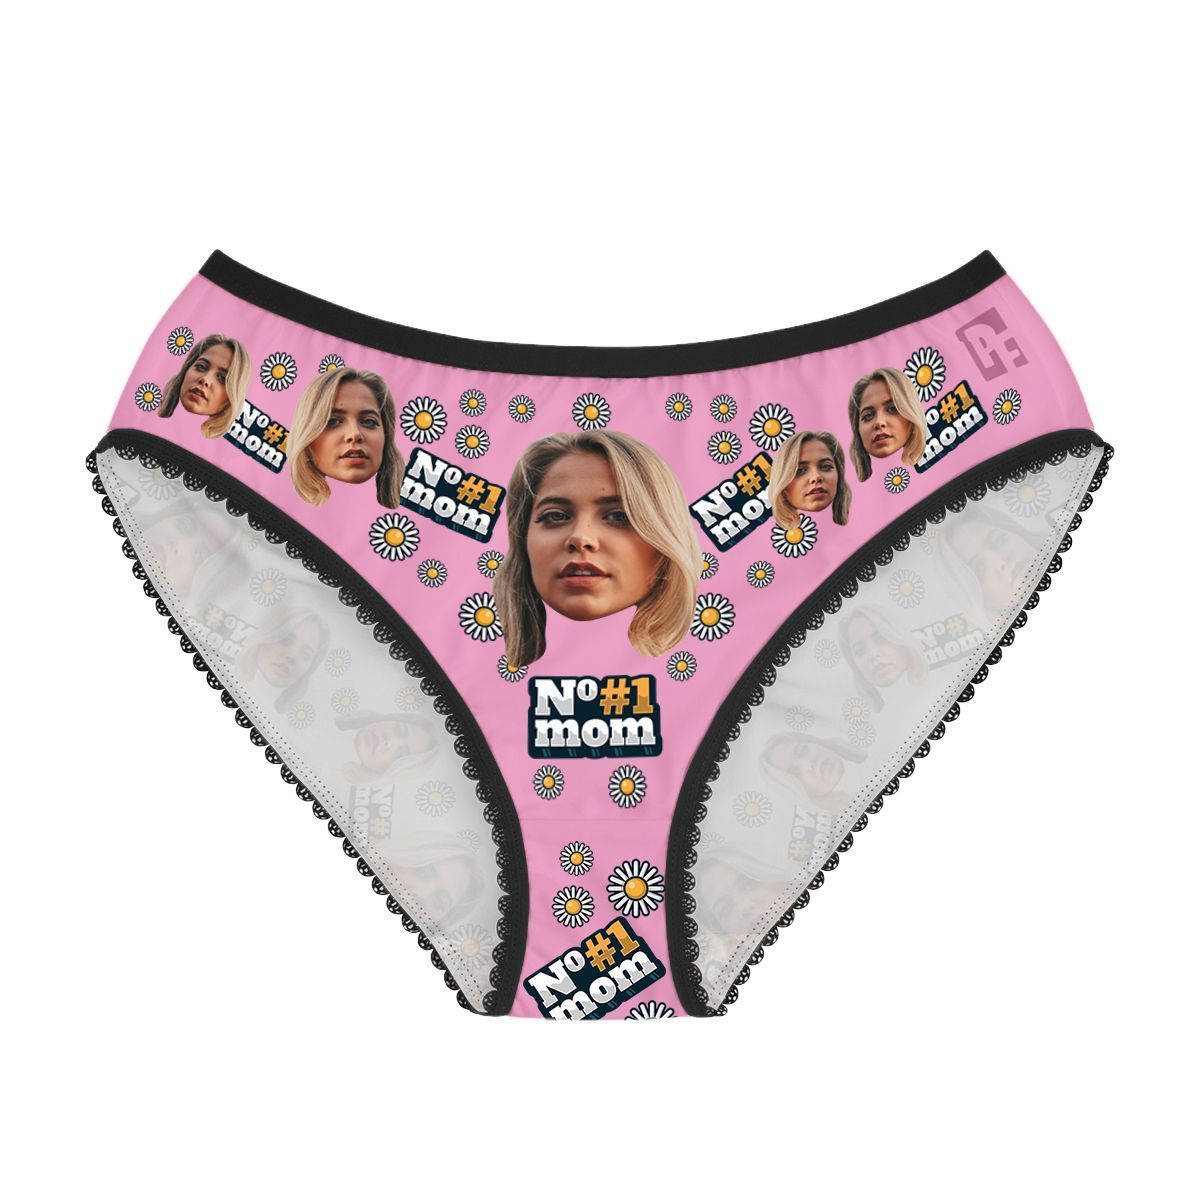 Pink #1 Mom women's underwear briefs personalized with photo printed on them